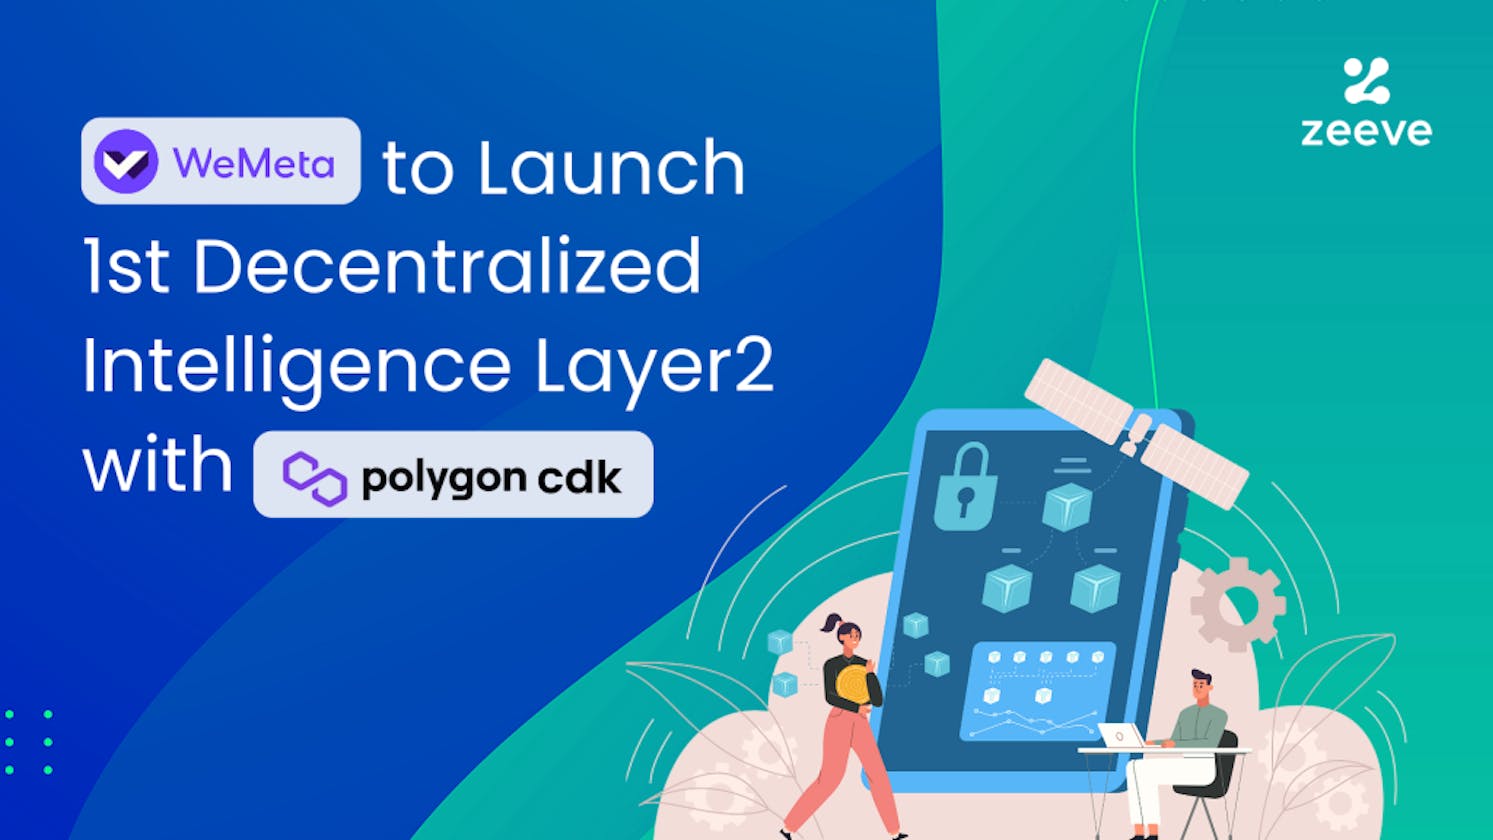 WeMeta to Launch 1st Decentralized Intelligence Layer2 with Polygon CDK